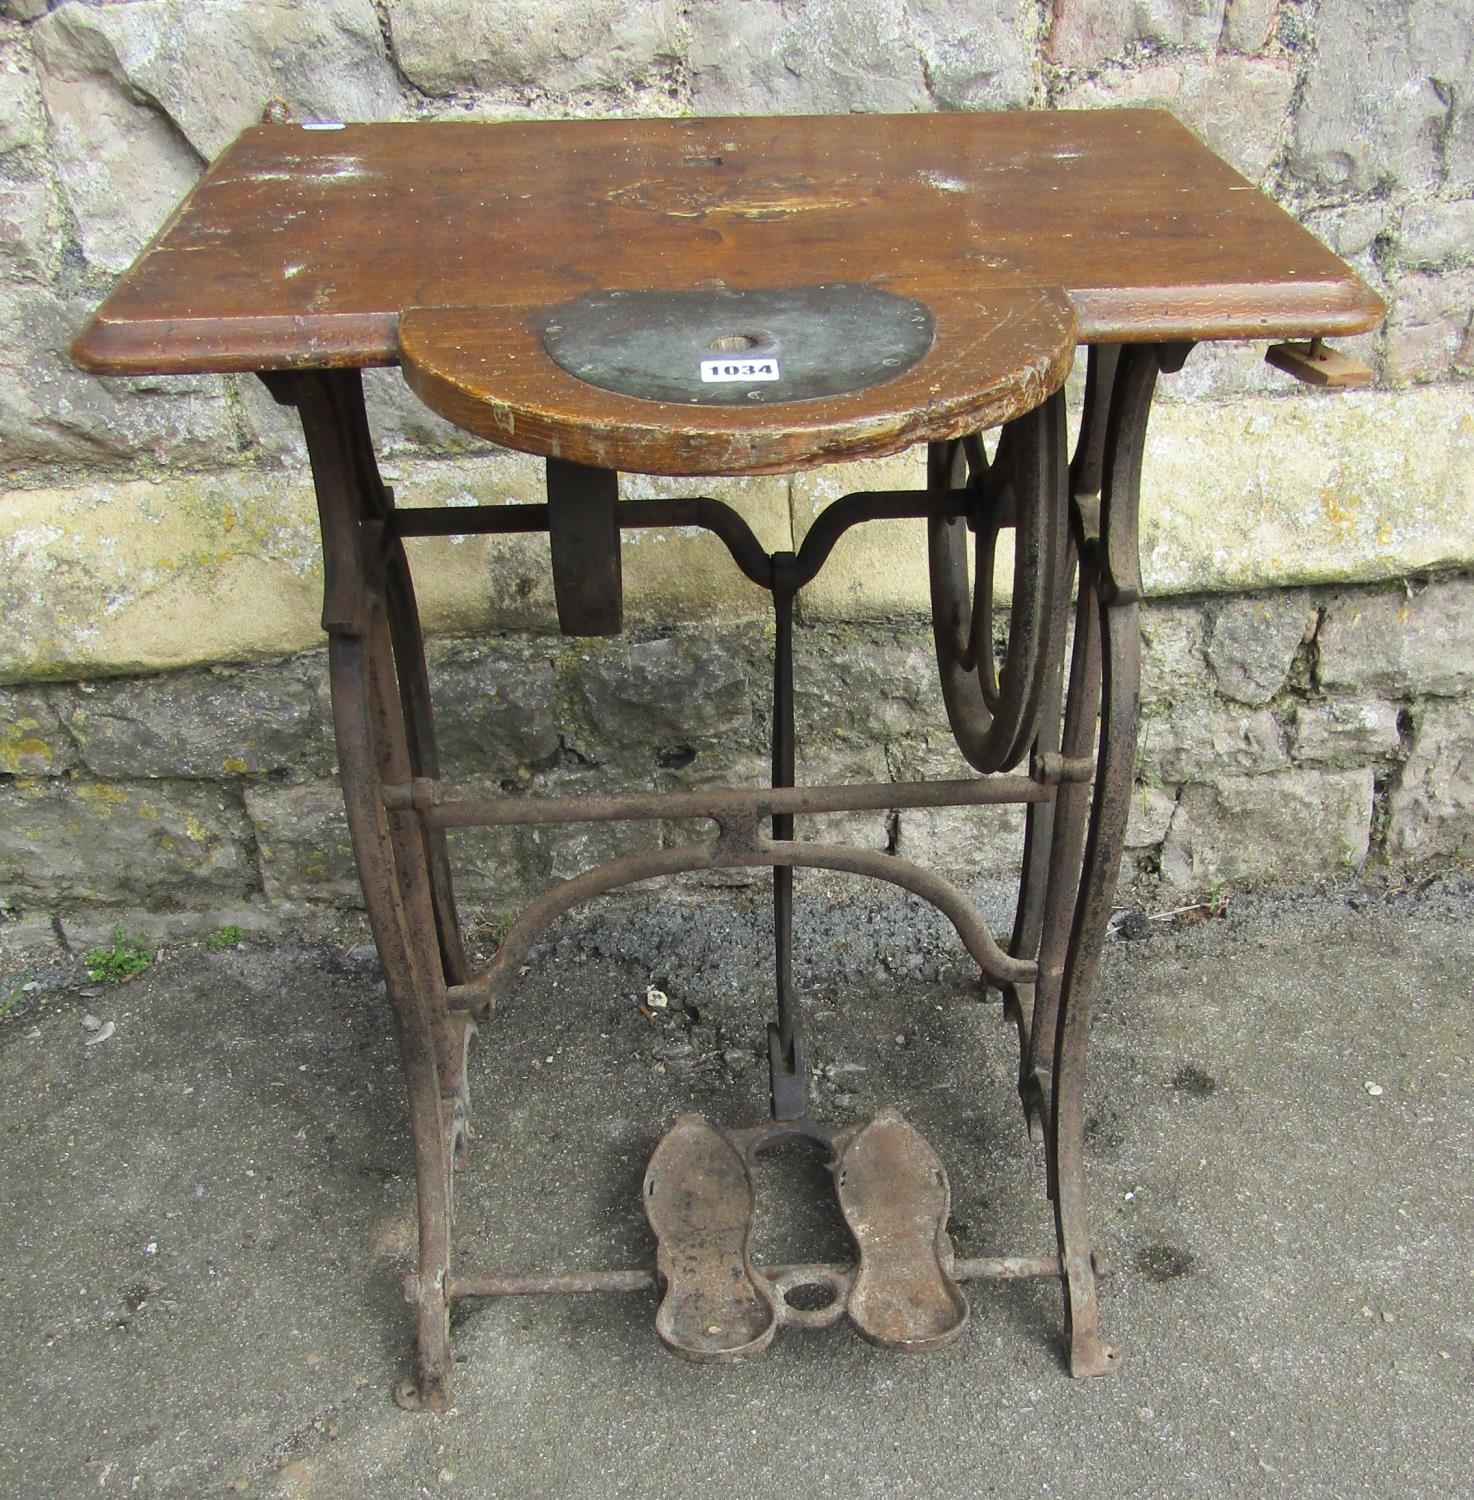 A vintage cast iron treadle sewing machine base with scumbled wooden top